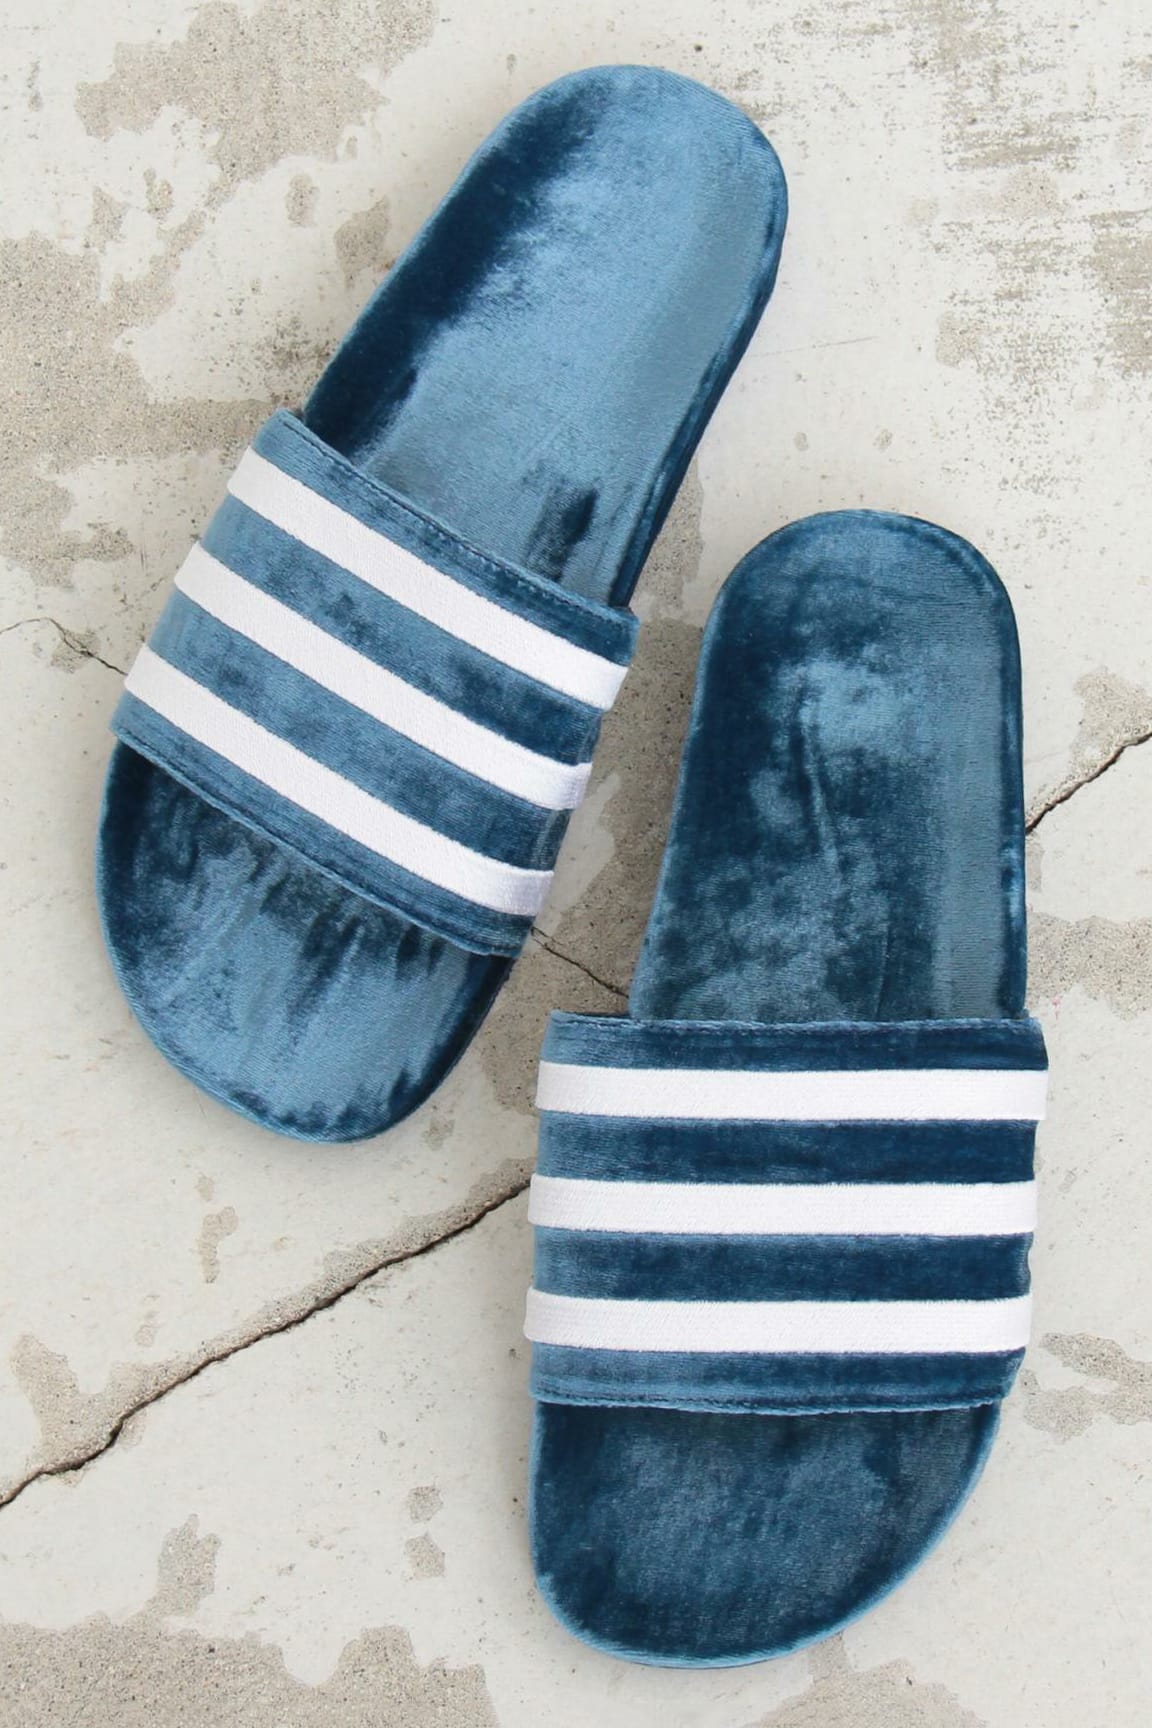 adidas Adilette Slides Now Exist in 